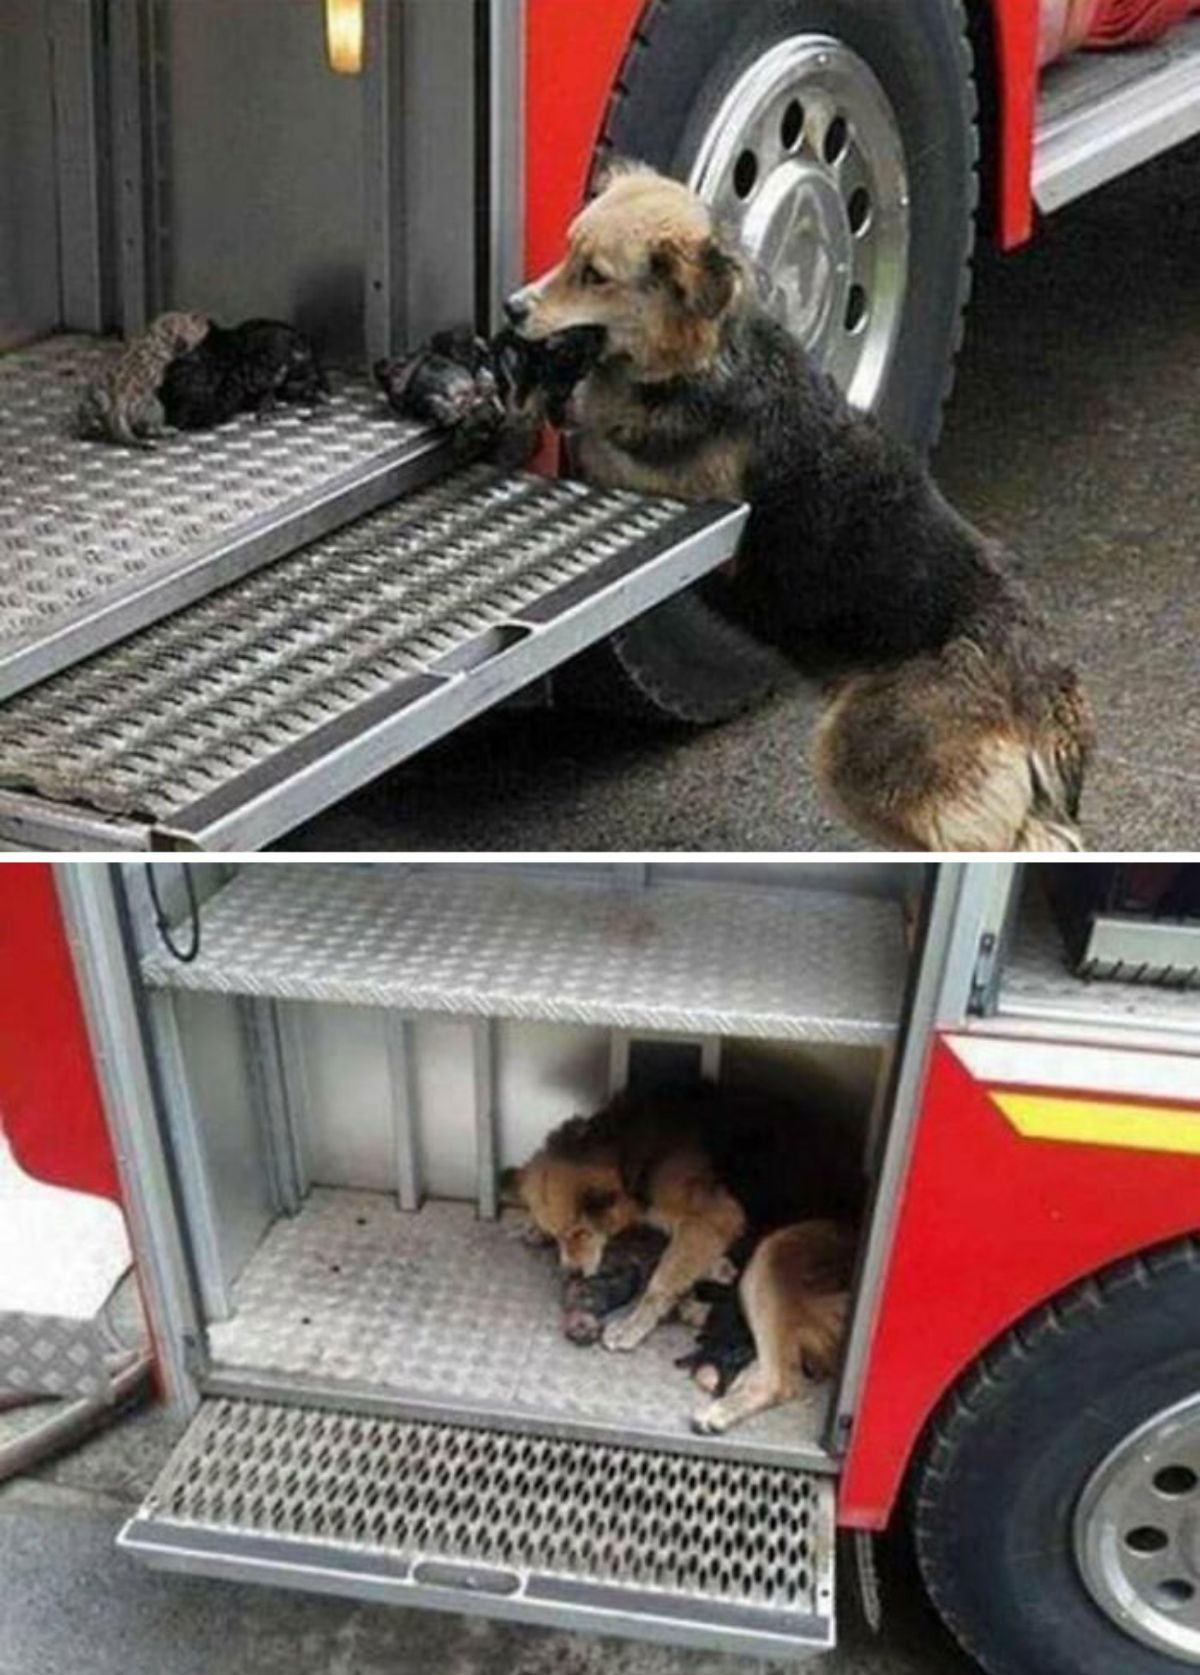 2 photos of a black and brown dog bringing in puppies into a fire truck and laying down next to them